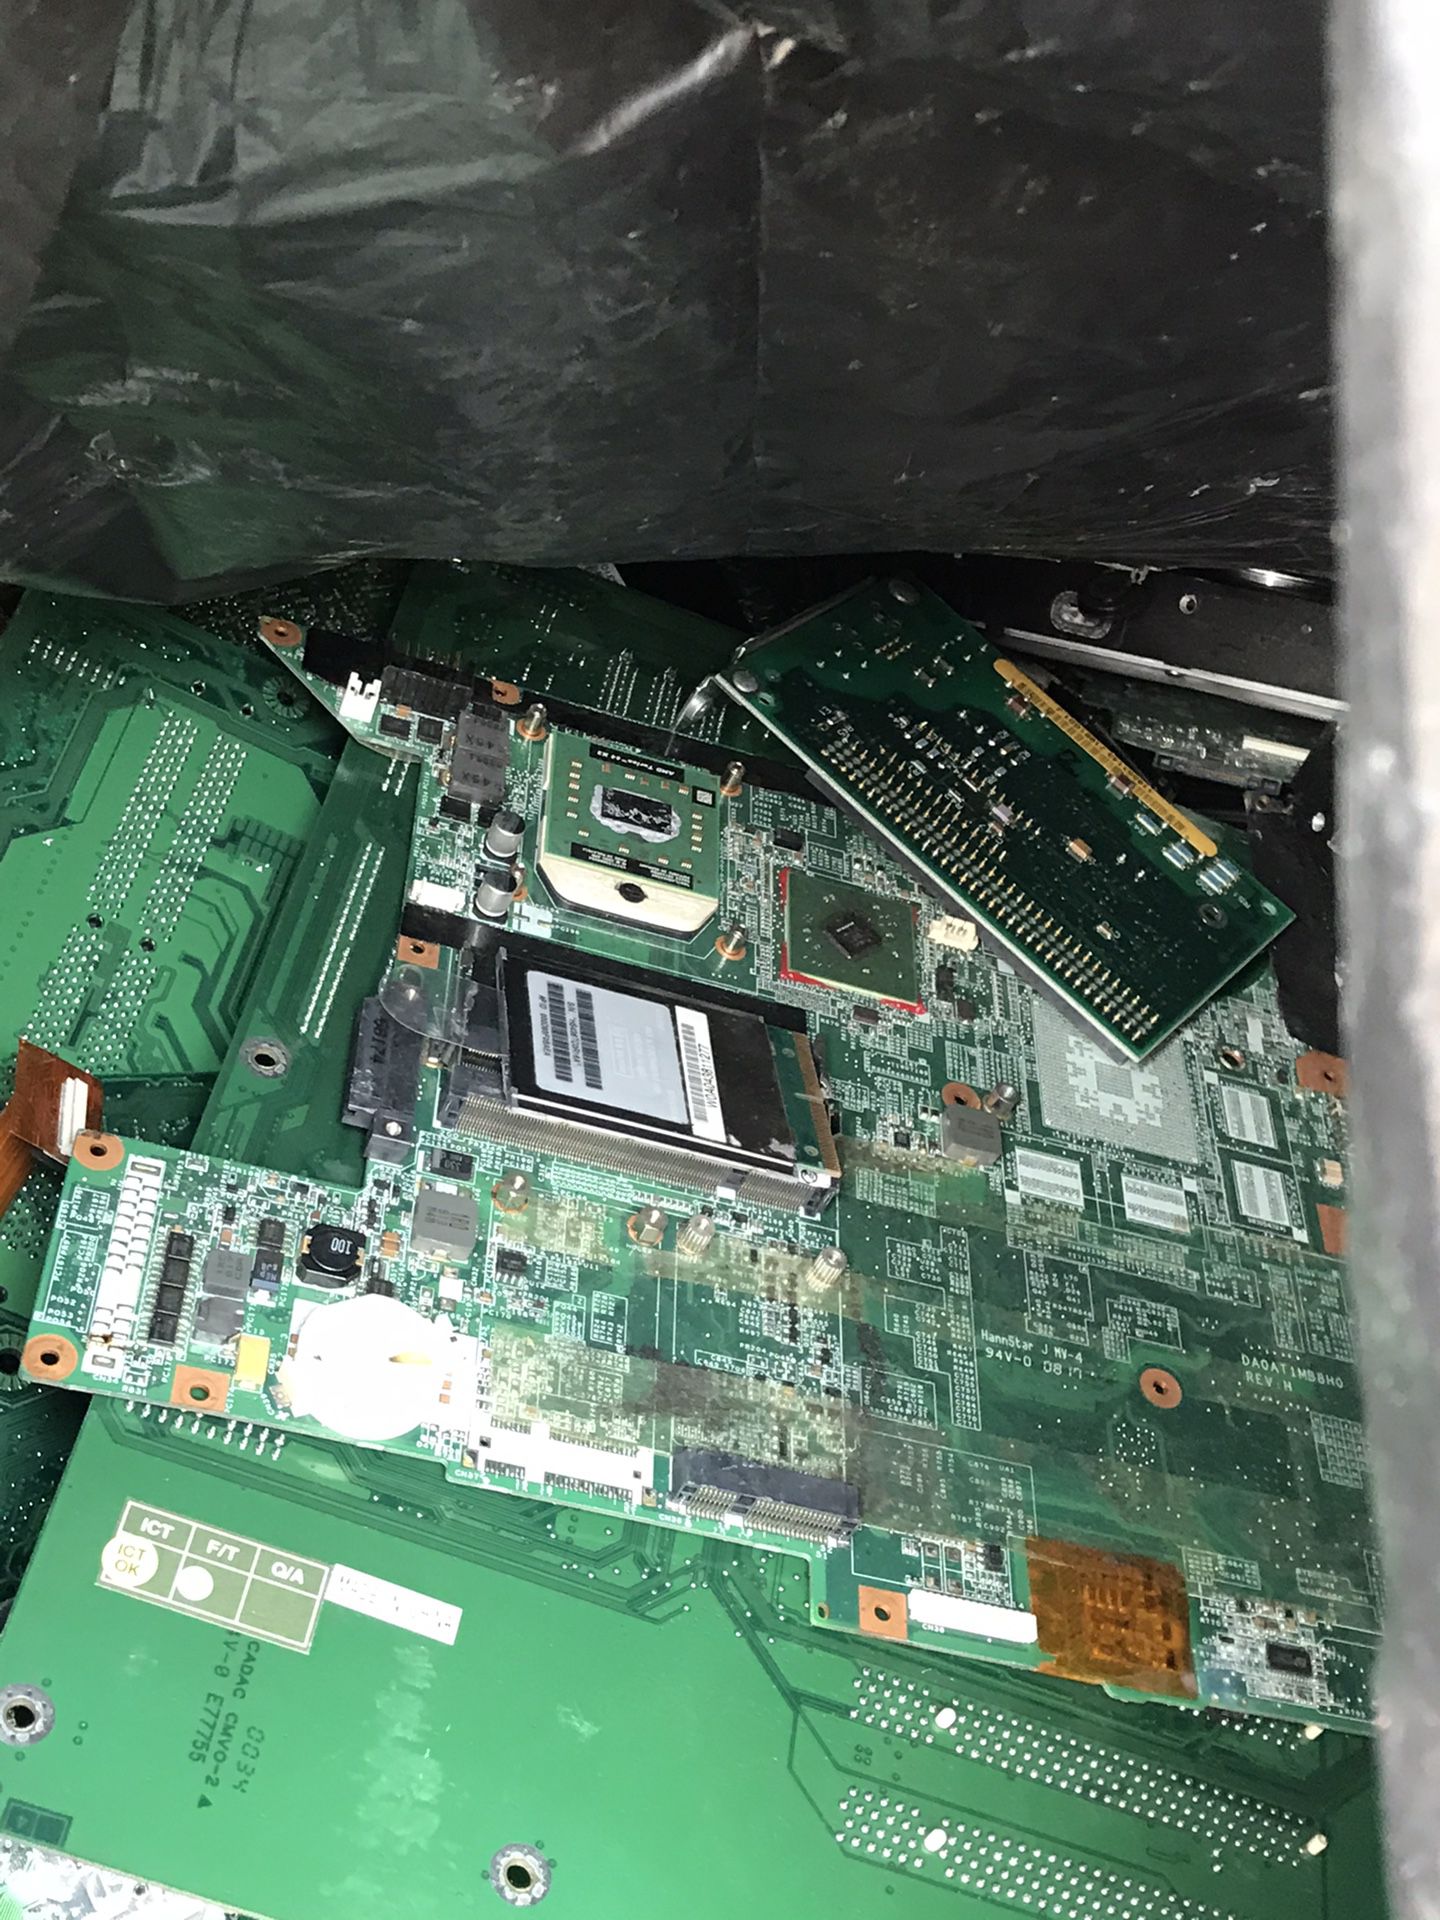 Gold recovery Huge bag of computer motherboards and processors for scrap gold recovery